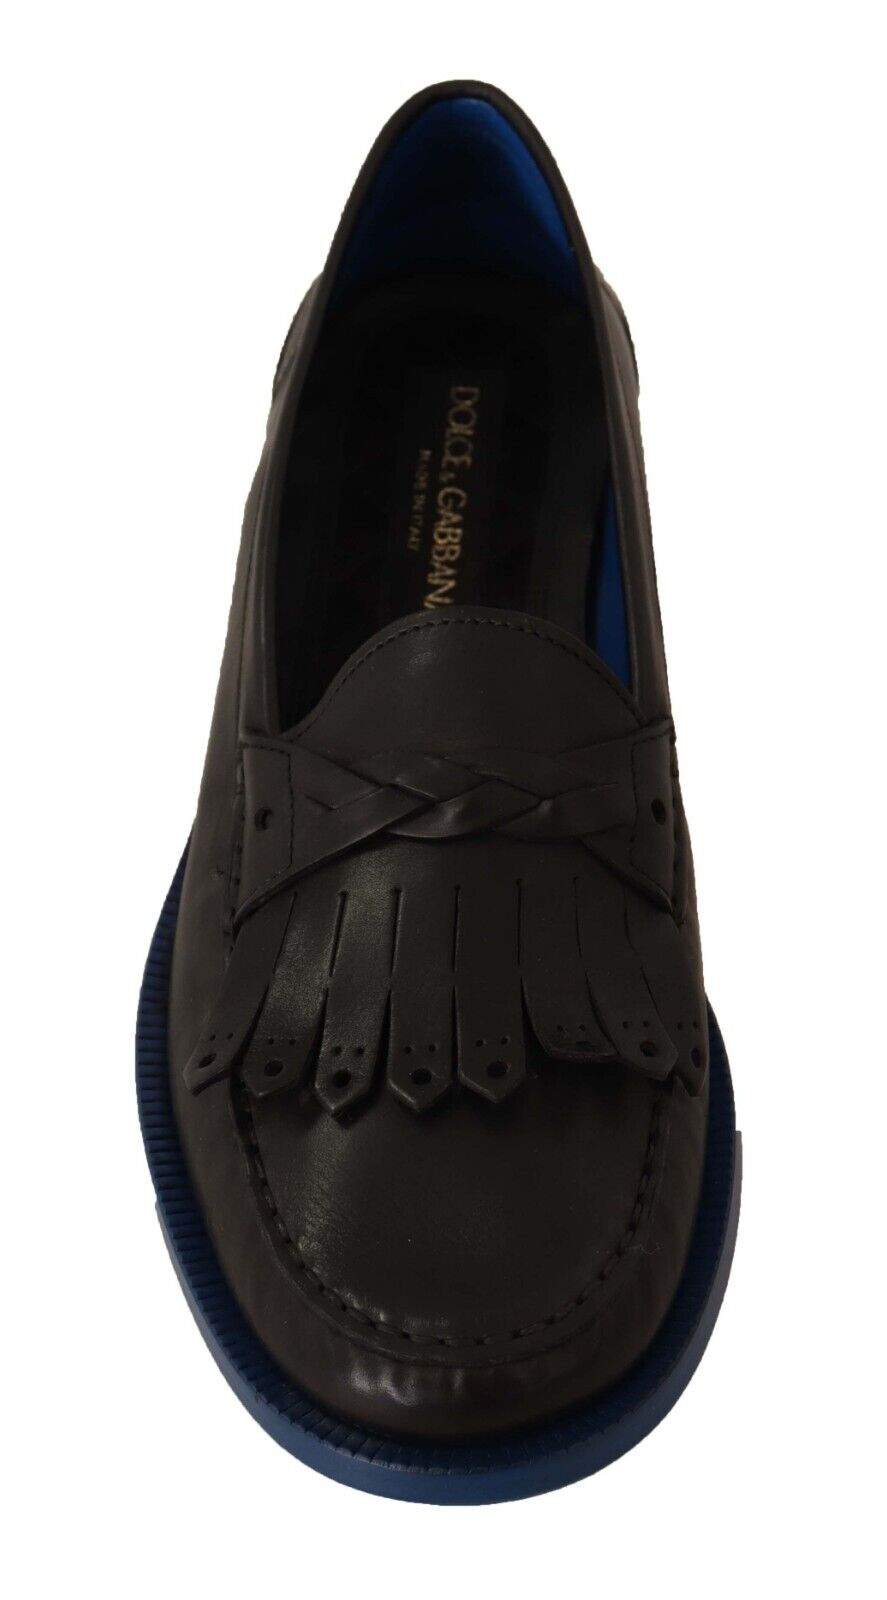 Dolce & Gabbana Black Leather Tassel Slip On Loafers Shoes #men, Black and Blue, Dolce & Gabbana, EU39/US6, feed-1, Loafers - Men - Shoes at SEYMAYKA